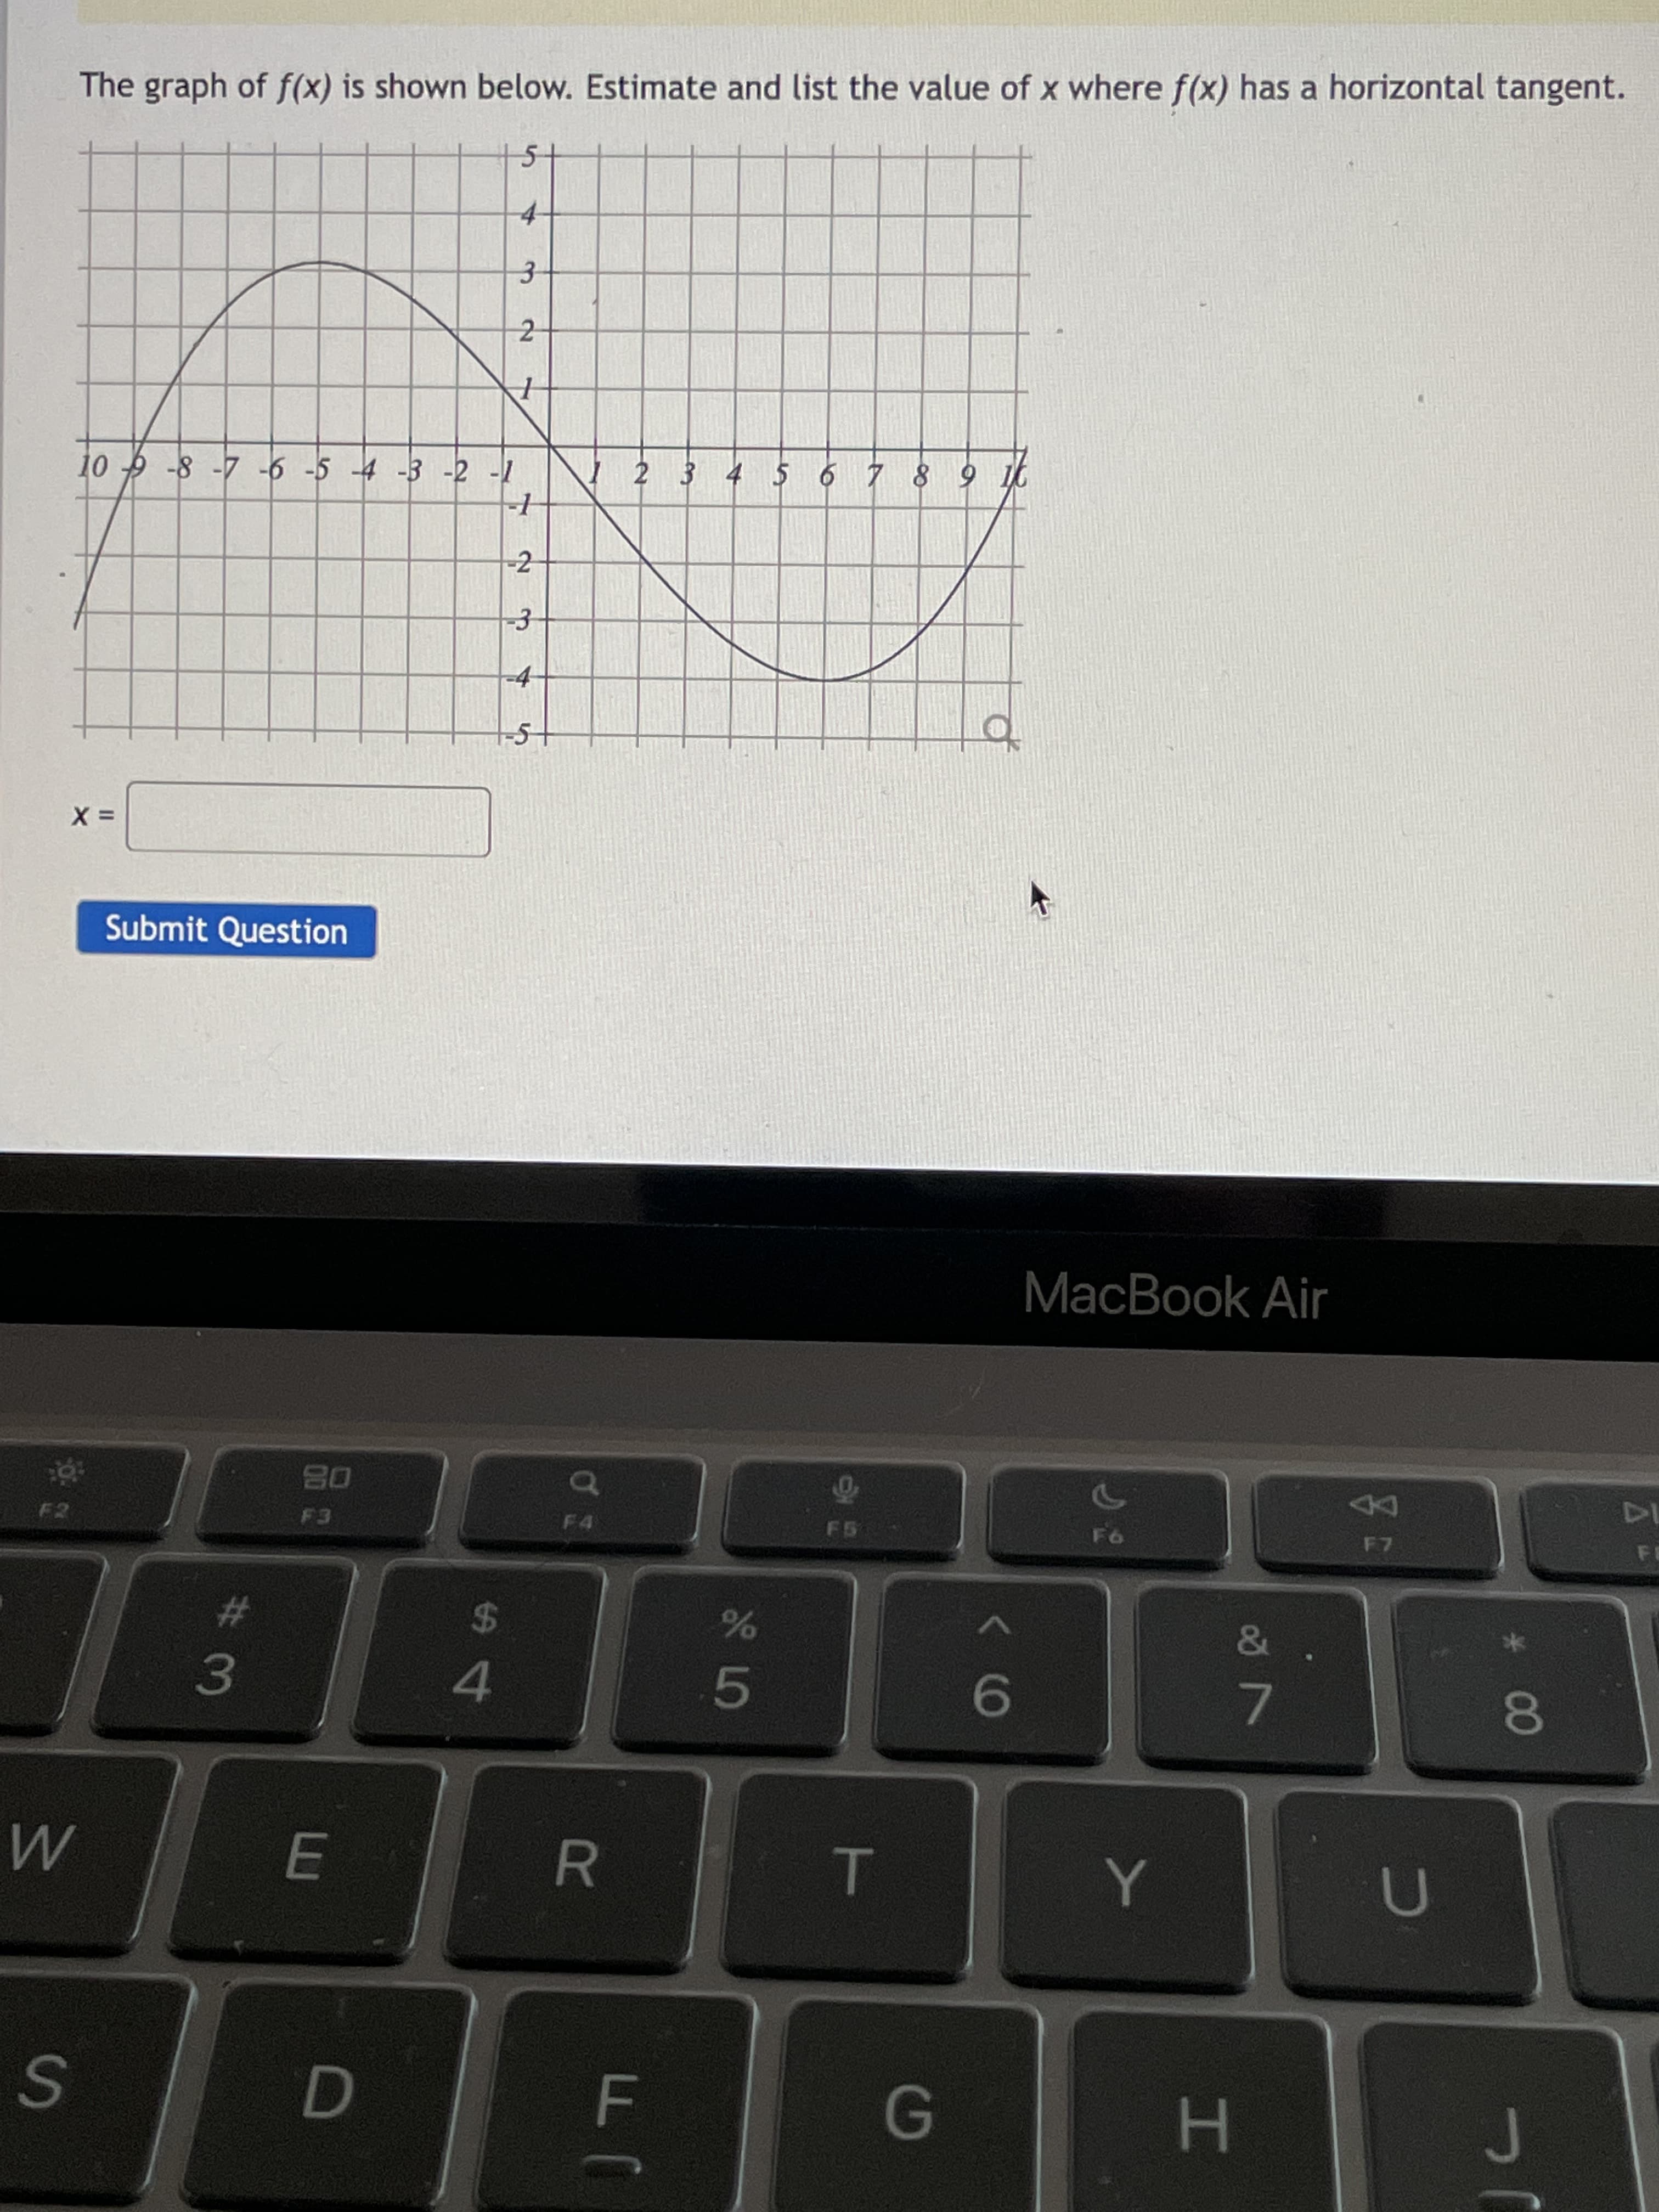 * 00
T
R
3.
EI
# 3
The graph of f(x) is shown below. Estimate and list the value of x where f (x) has a horizontal tangent.
|2 3 4 5 6 7 8 9
-2
-3
Submit Question
MacBook Air
08
F2
F4
F5
24
4
%23
09
7.
